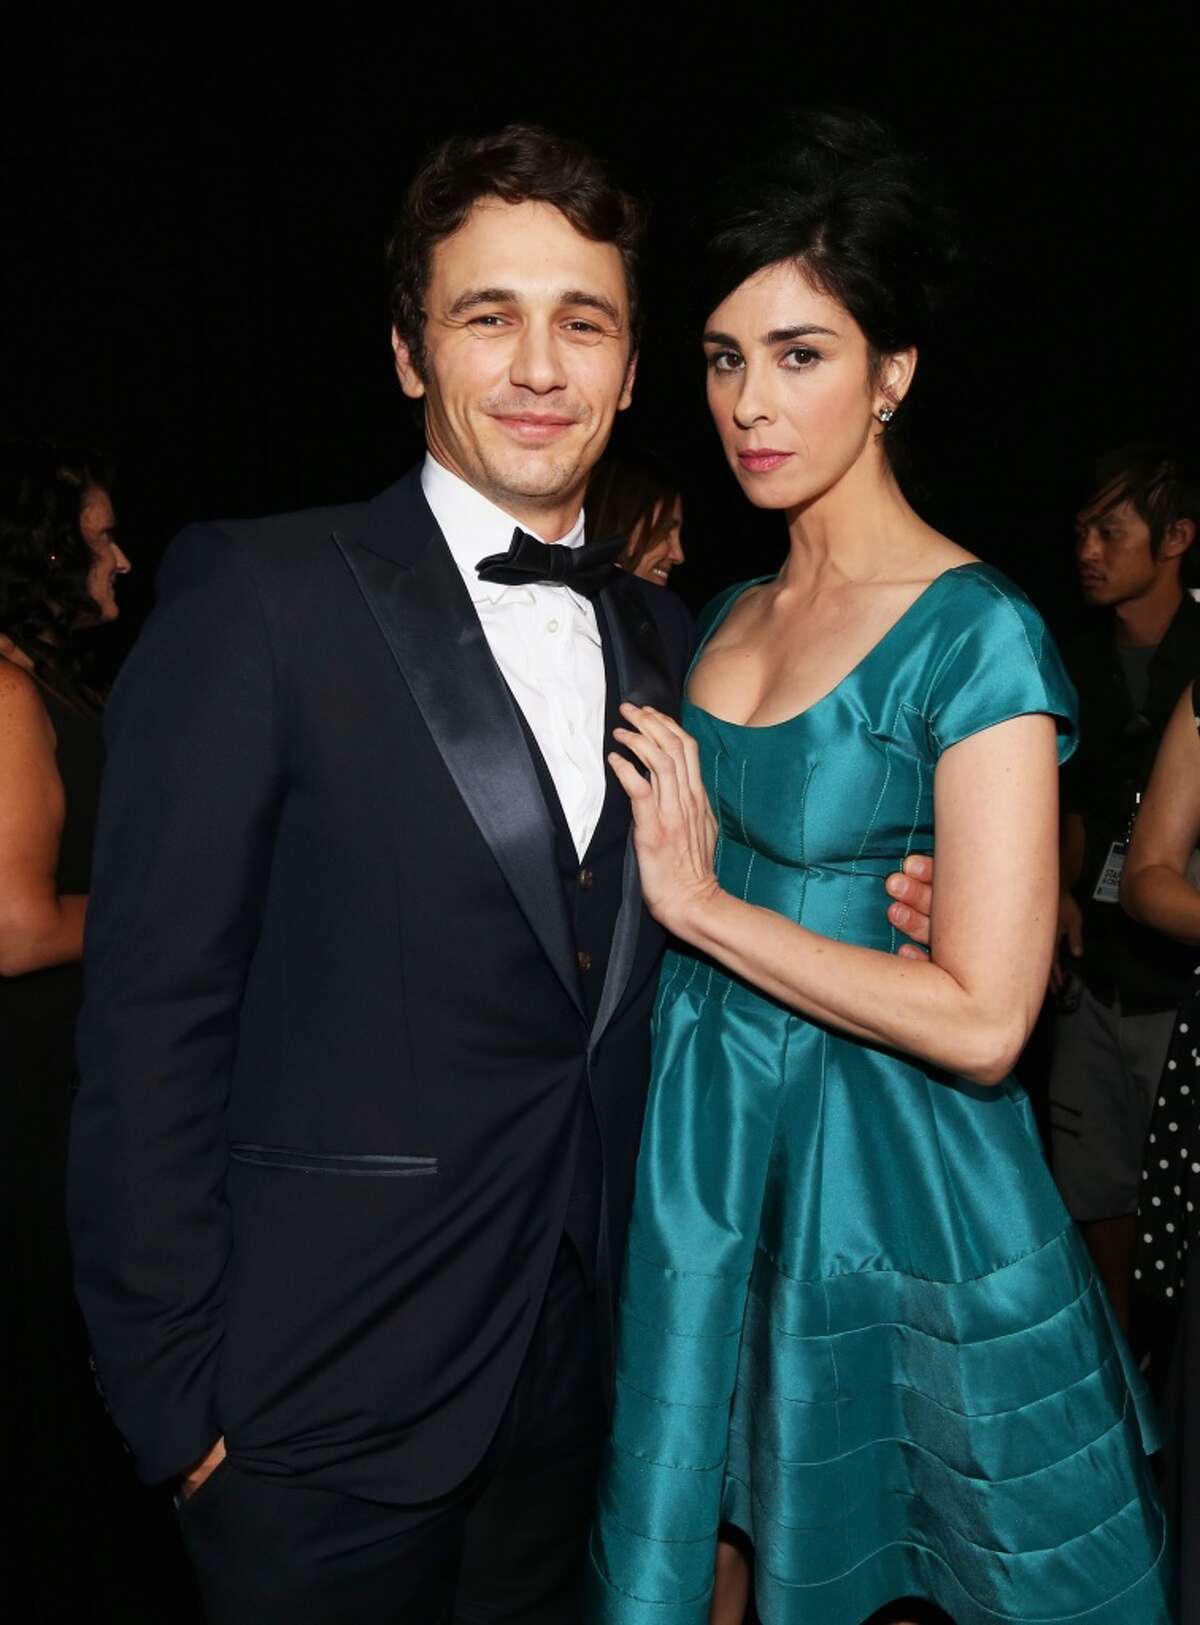 Roastee James Franco and comedienne Sarah Silverman attend The Comedy Central Roast of James Franco at Culver Studios on August 25, 2013 in Culver City, California.